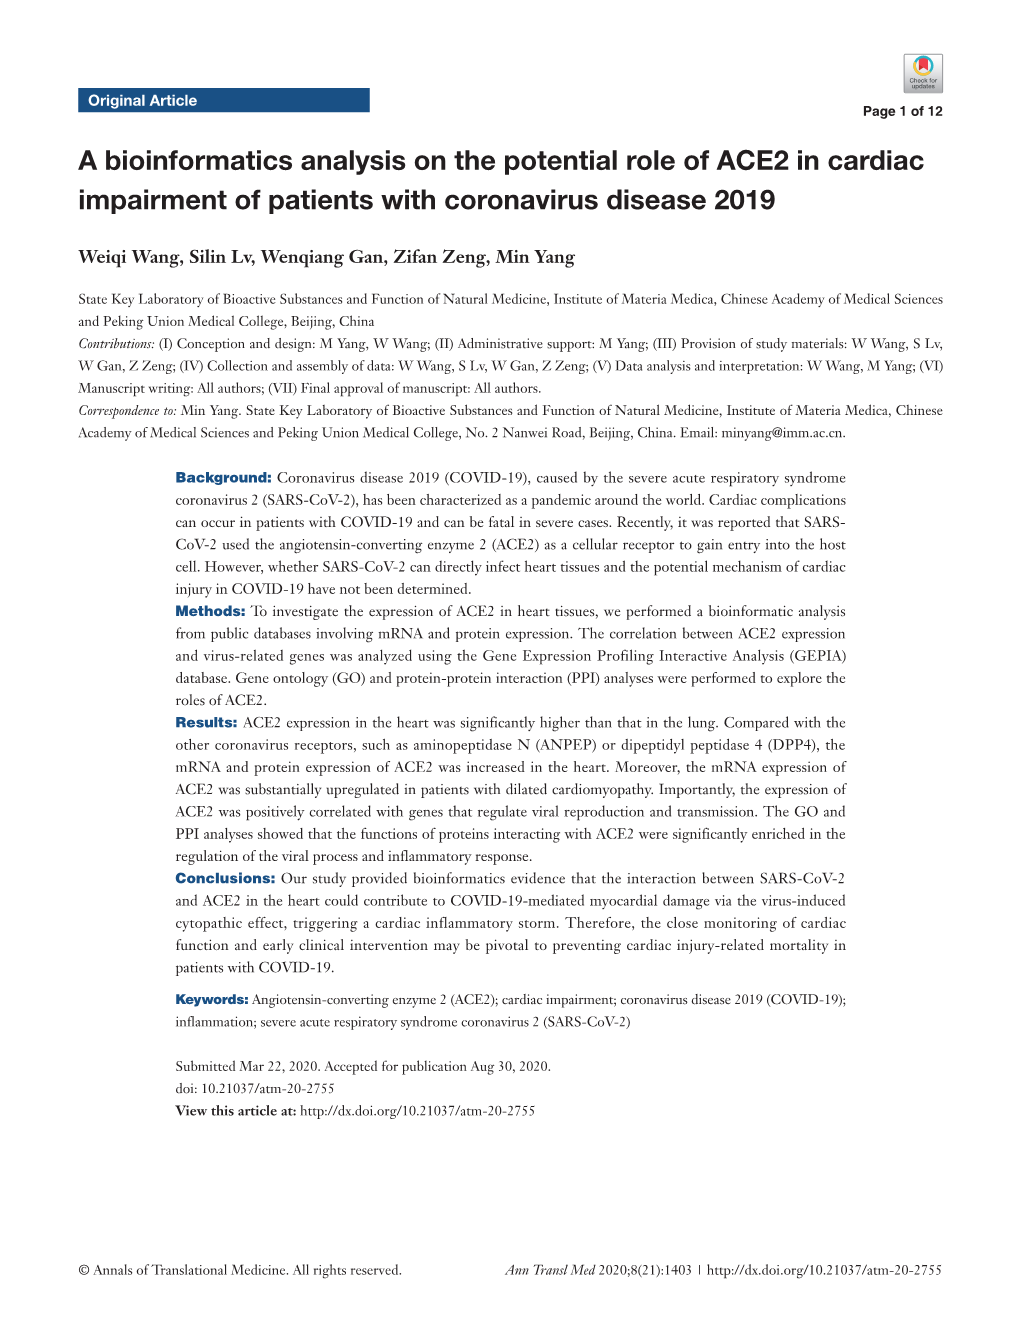 A Bioinformatics Analysis on the Potential Role of ACE2 in Cardiac Impairment of Patients with Coronavirus Disease 2019